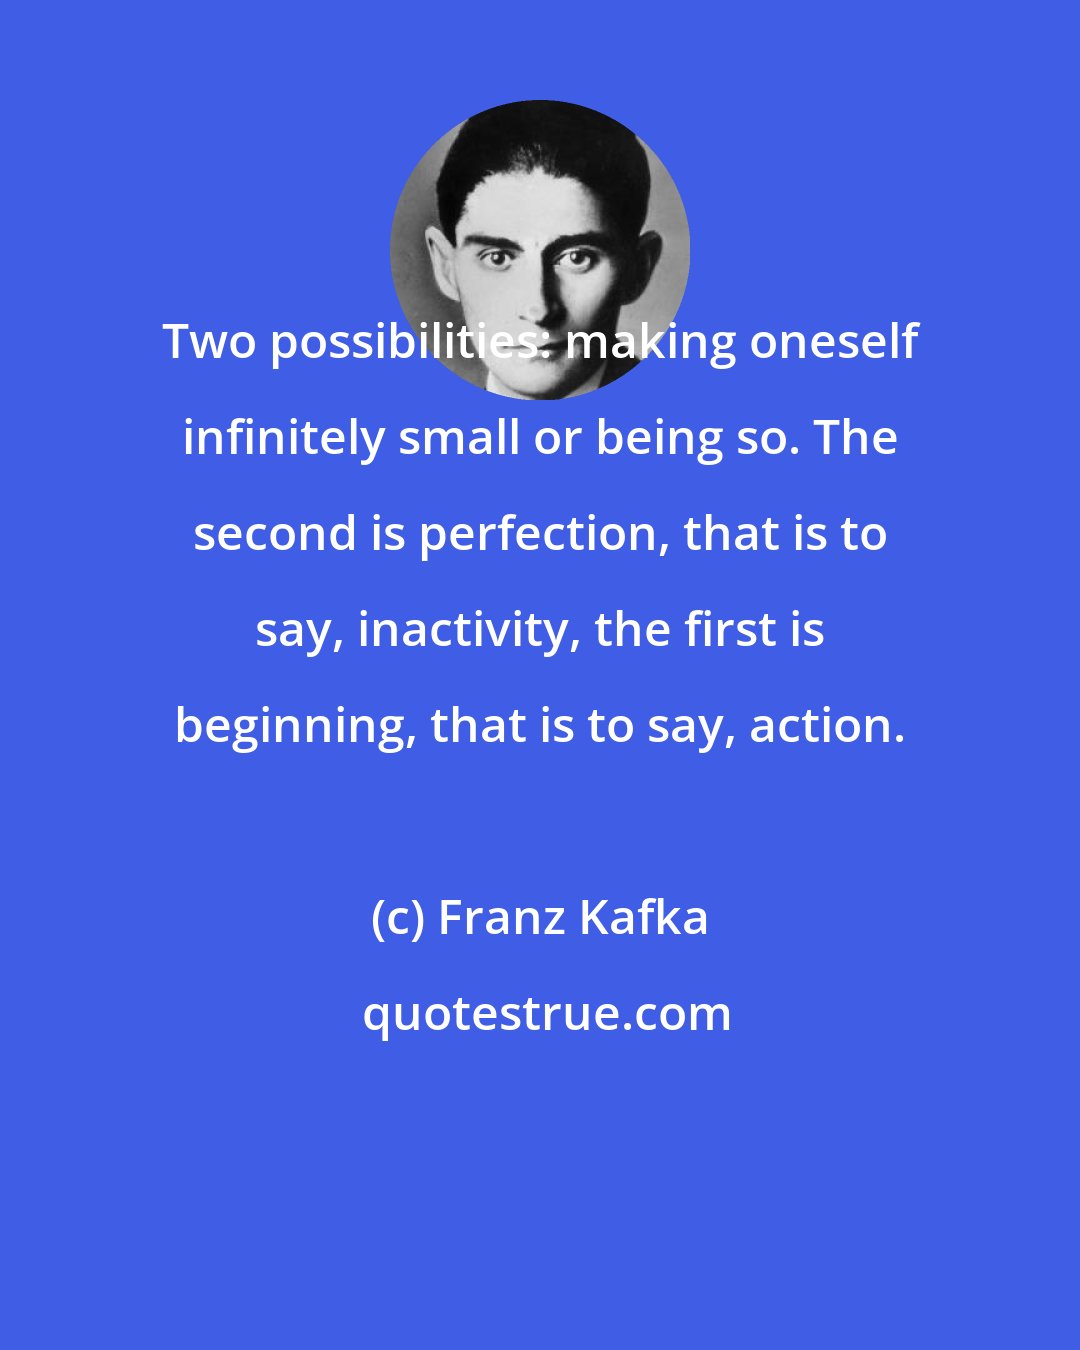 Franz Kafka: Two possibilities: making oneself infinitely small or being so. The second is perfection, that is to say, inactivity, the first is beginning, that is to say, action.